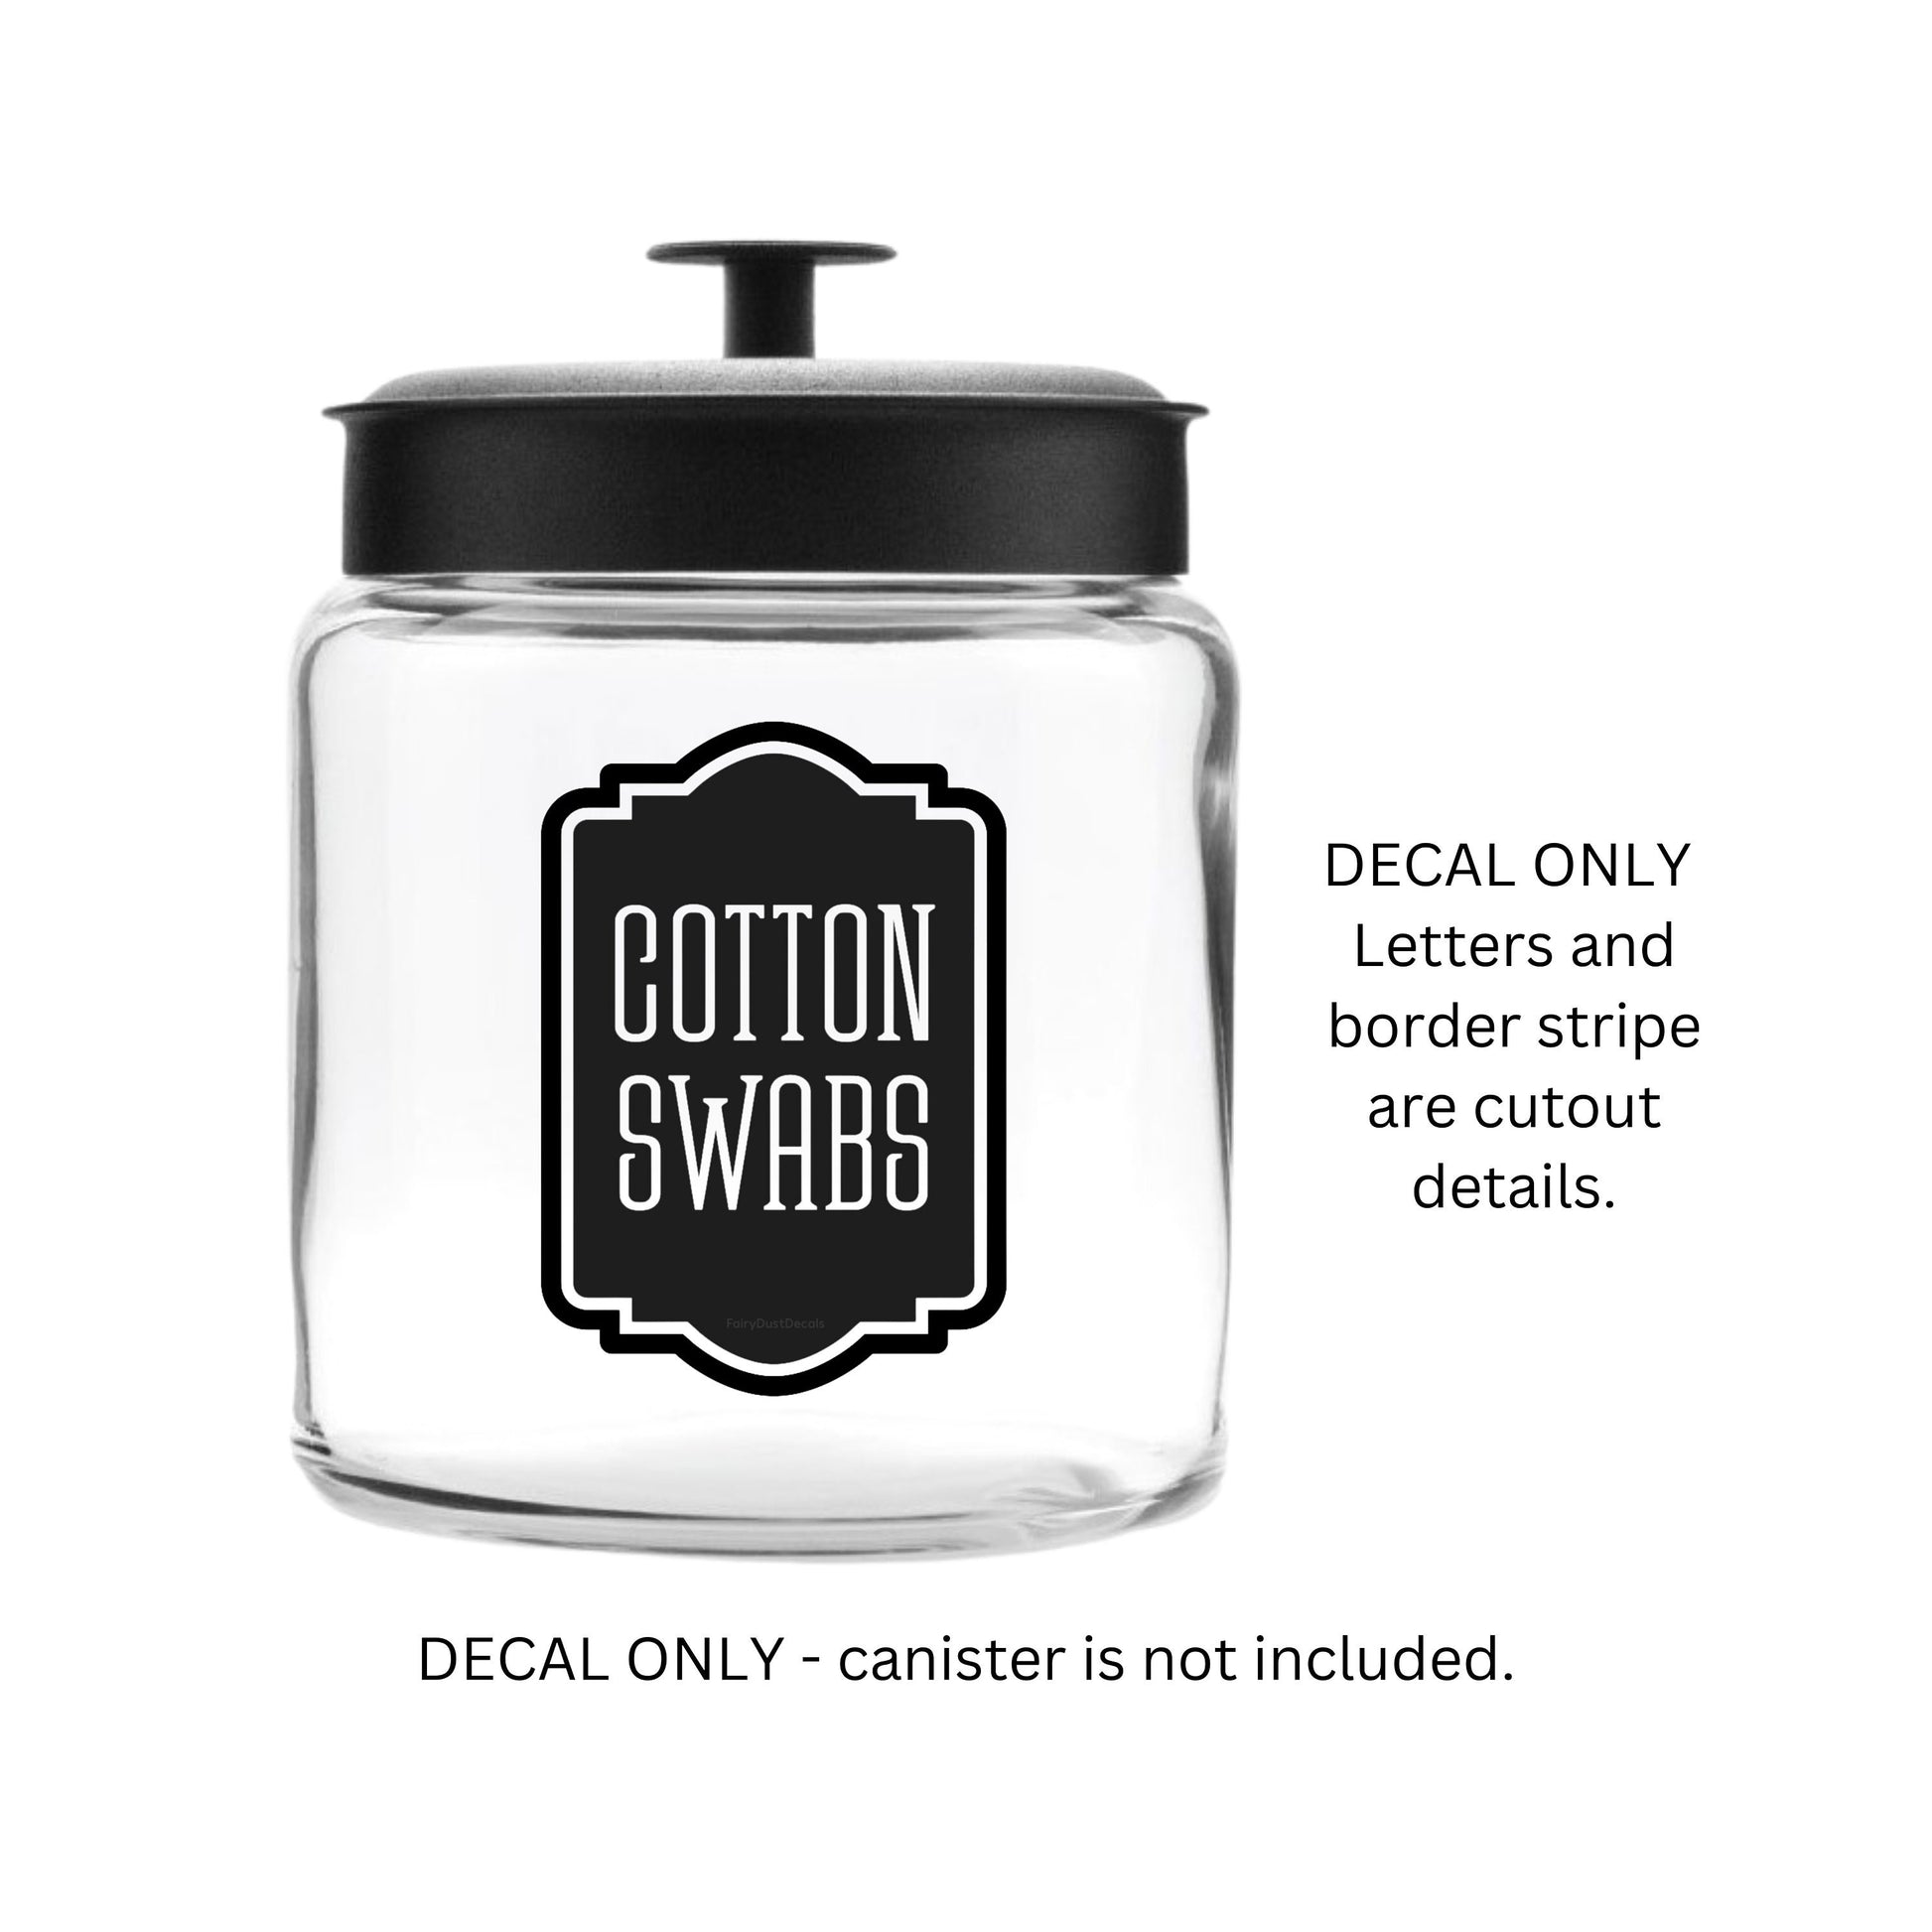 Cotton Swabs Decal for bathroom containers and jars, apothecary farmhouse style stickers for organized bathroom and home